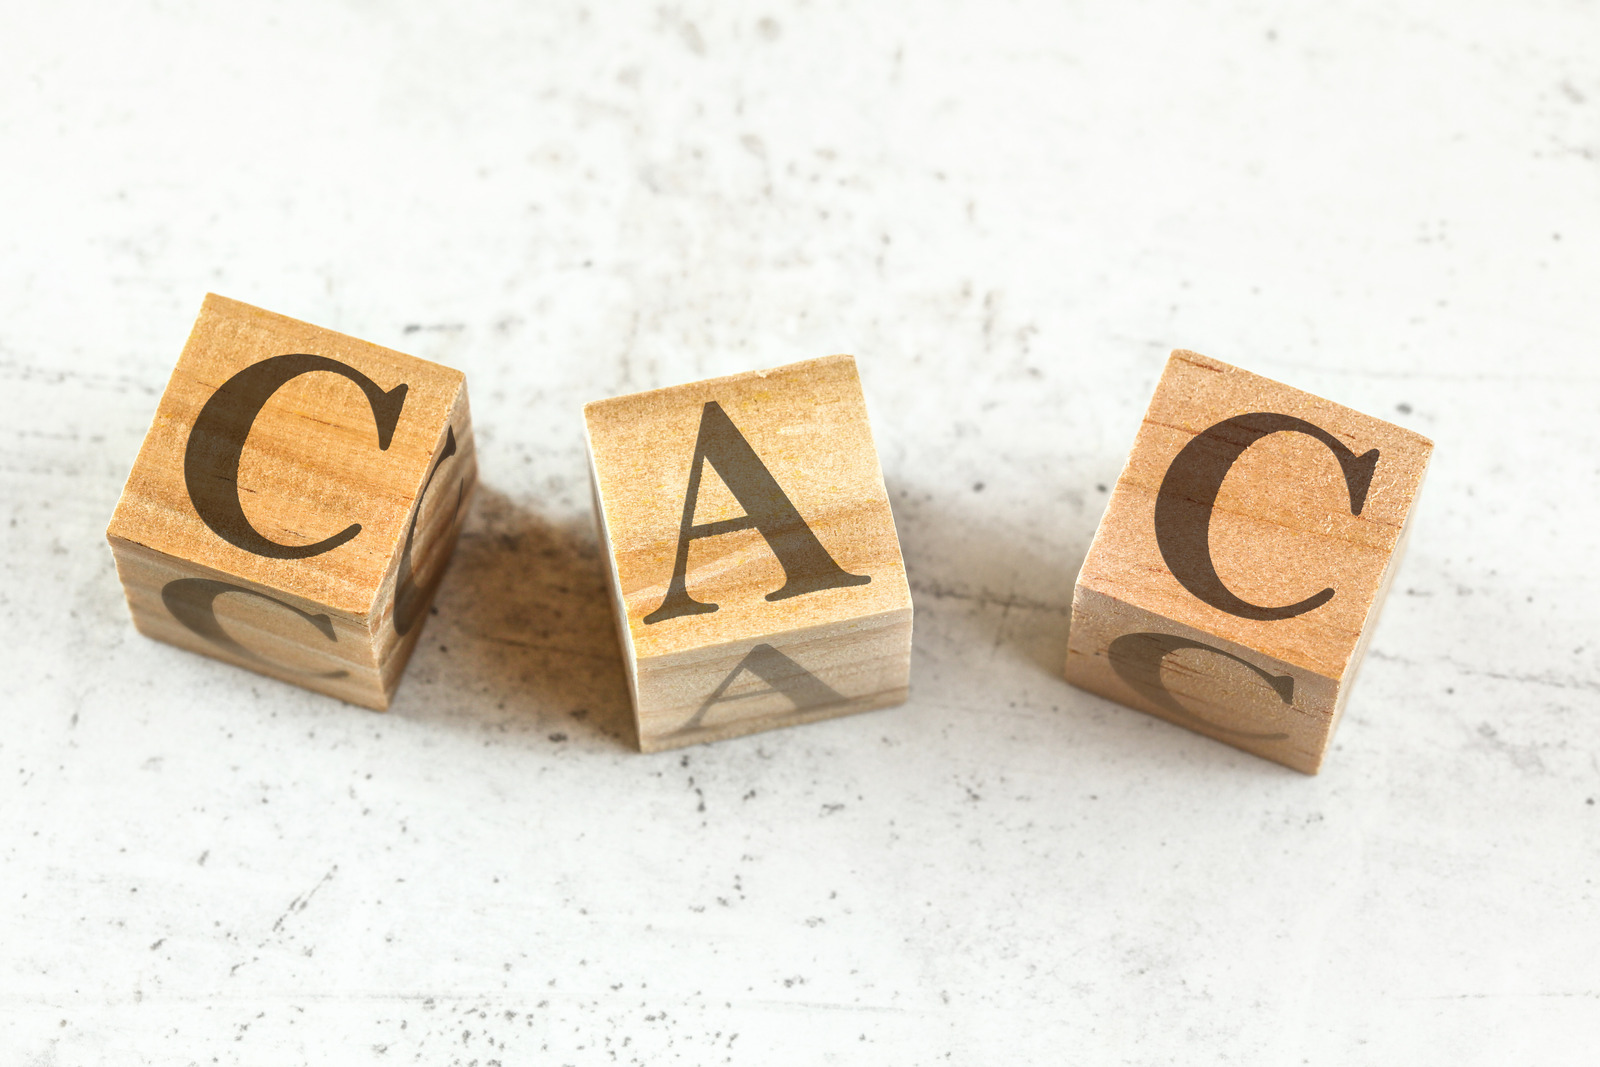 Three wooden cubes with letters CAC stands for Customer Acquisition Cost on white board.